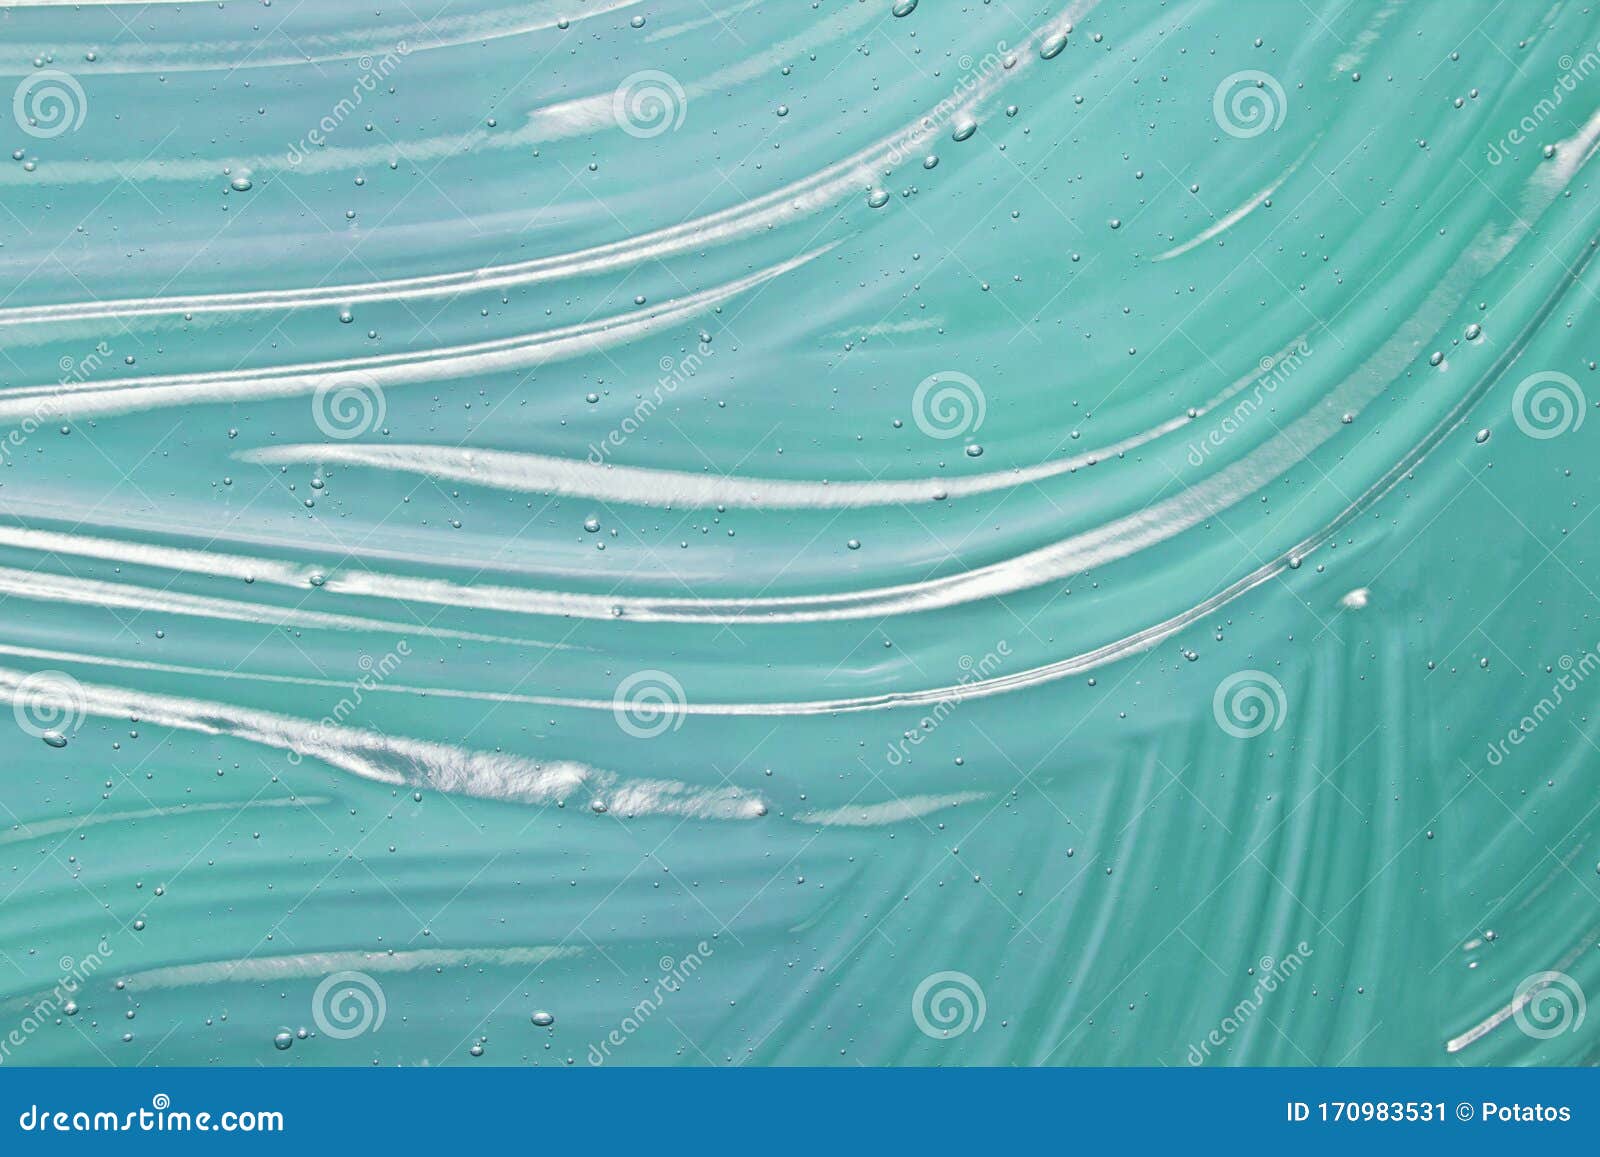 blue cosmetic gel texture background. transparent colored skin care, hair styling, hygiene product sample